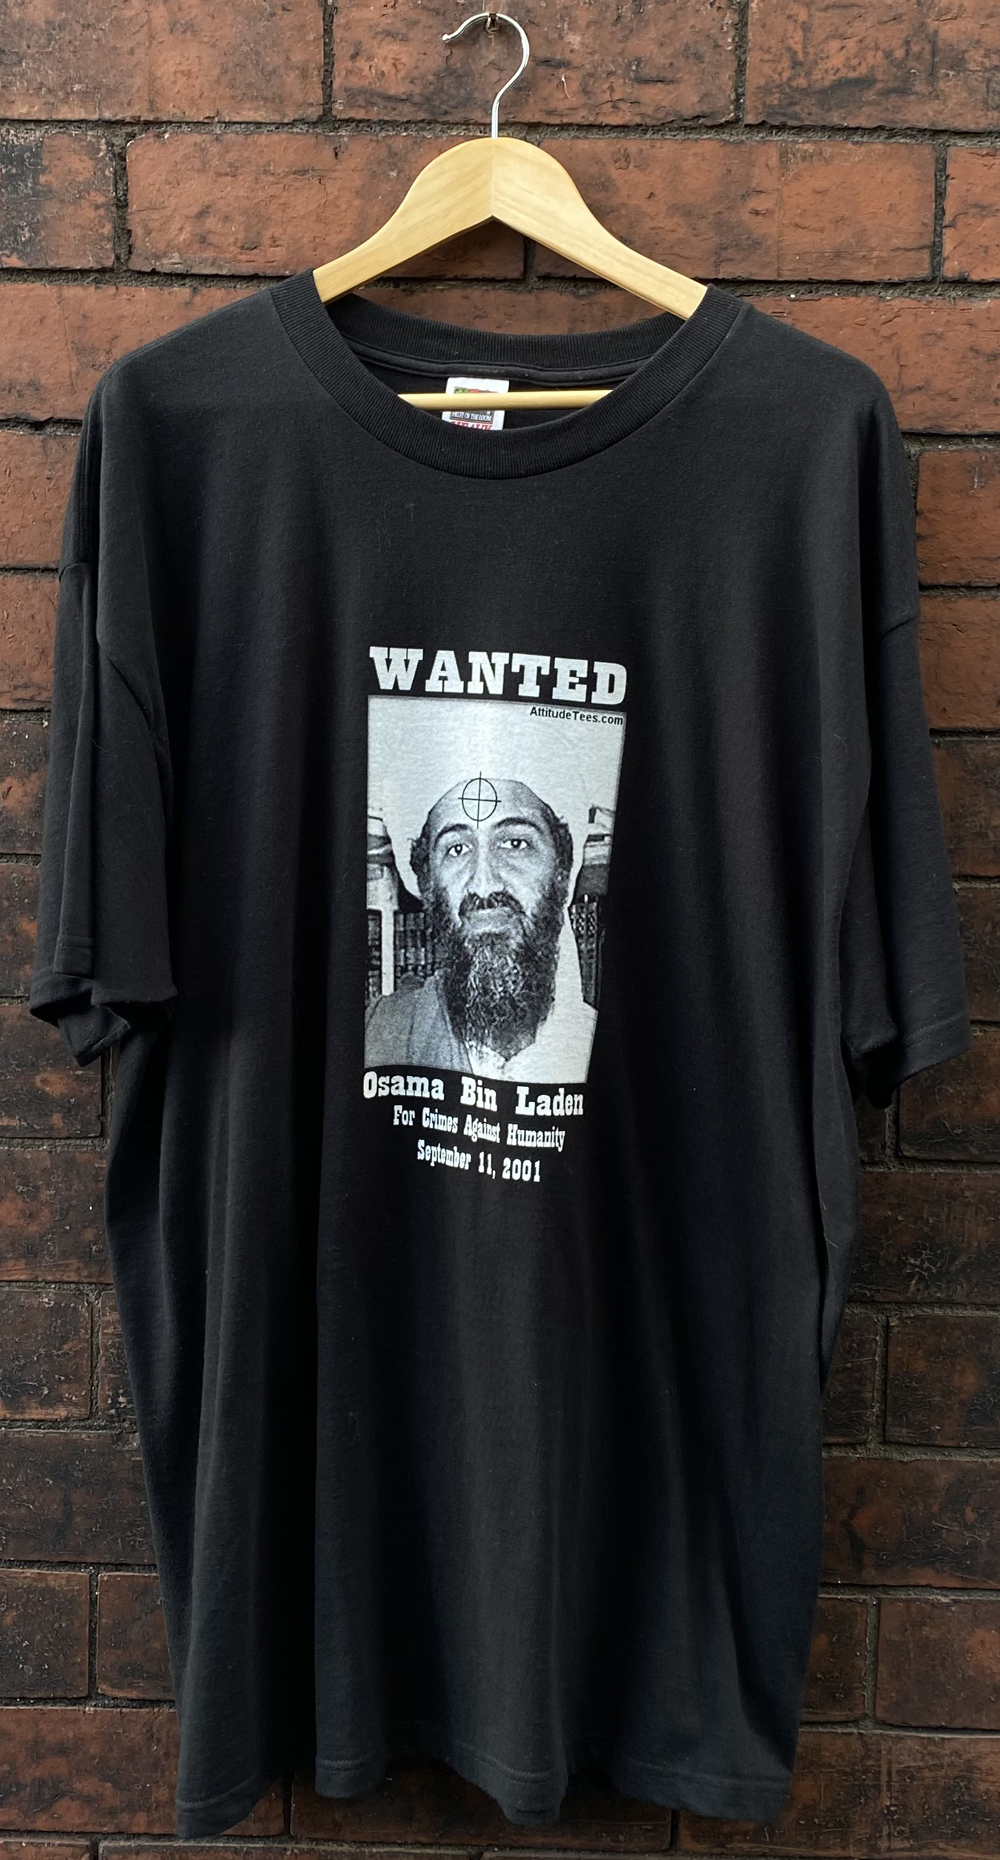 Vintage 2000s Wanted Osama Bin Laden T-Shirt for crimes against humanity